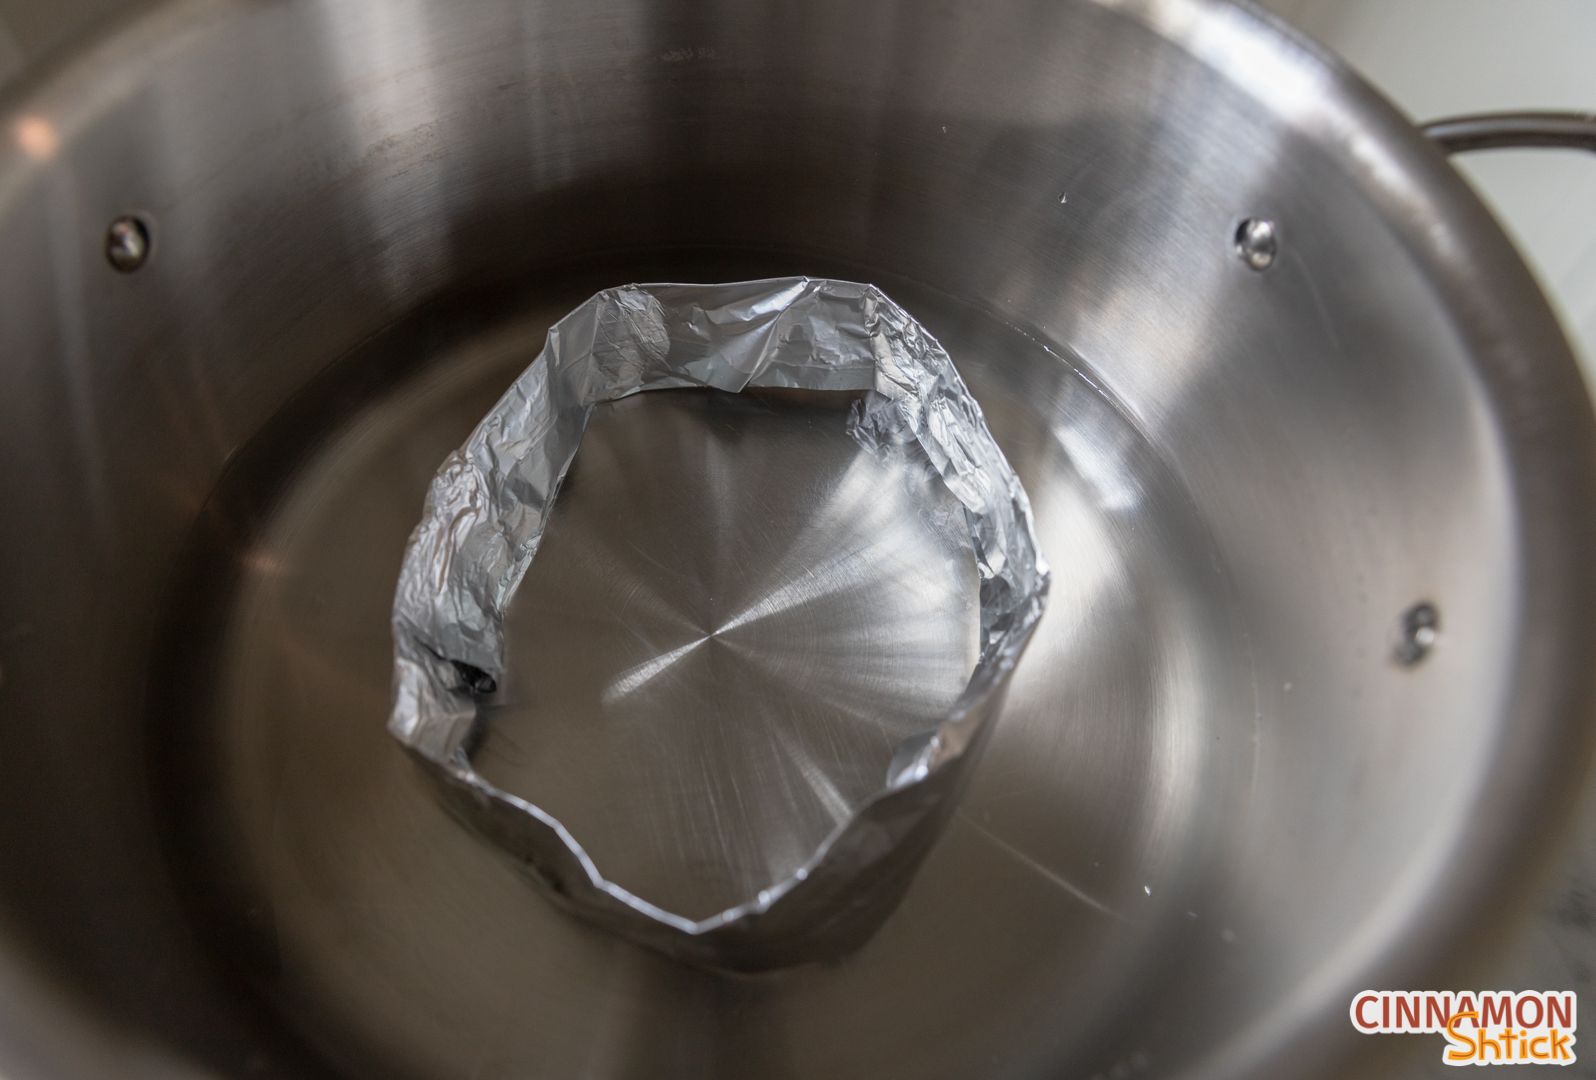 Inside of large pot showing a ring made from heavy duty aluminum foil with water approximately 3/4 of the way up the ring. 